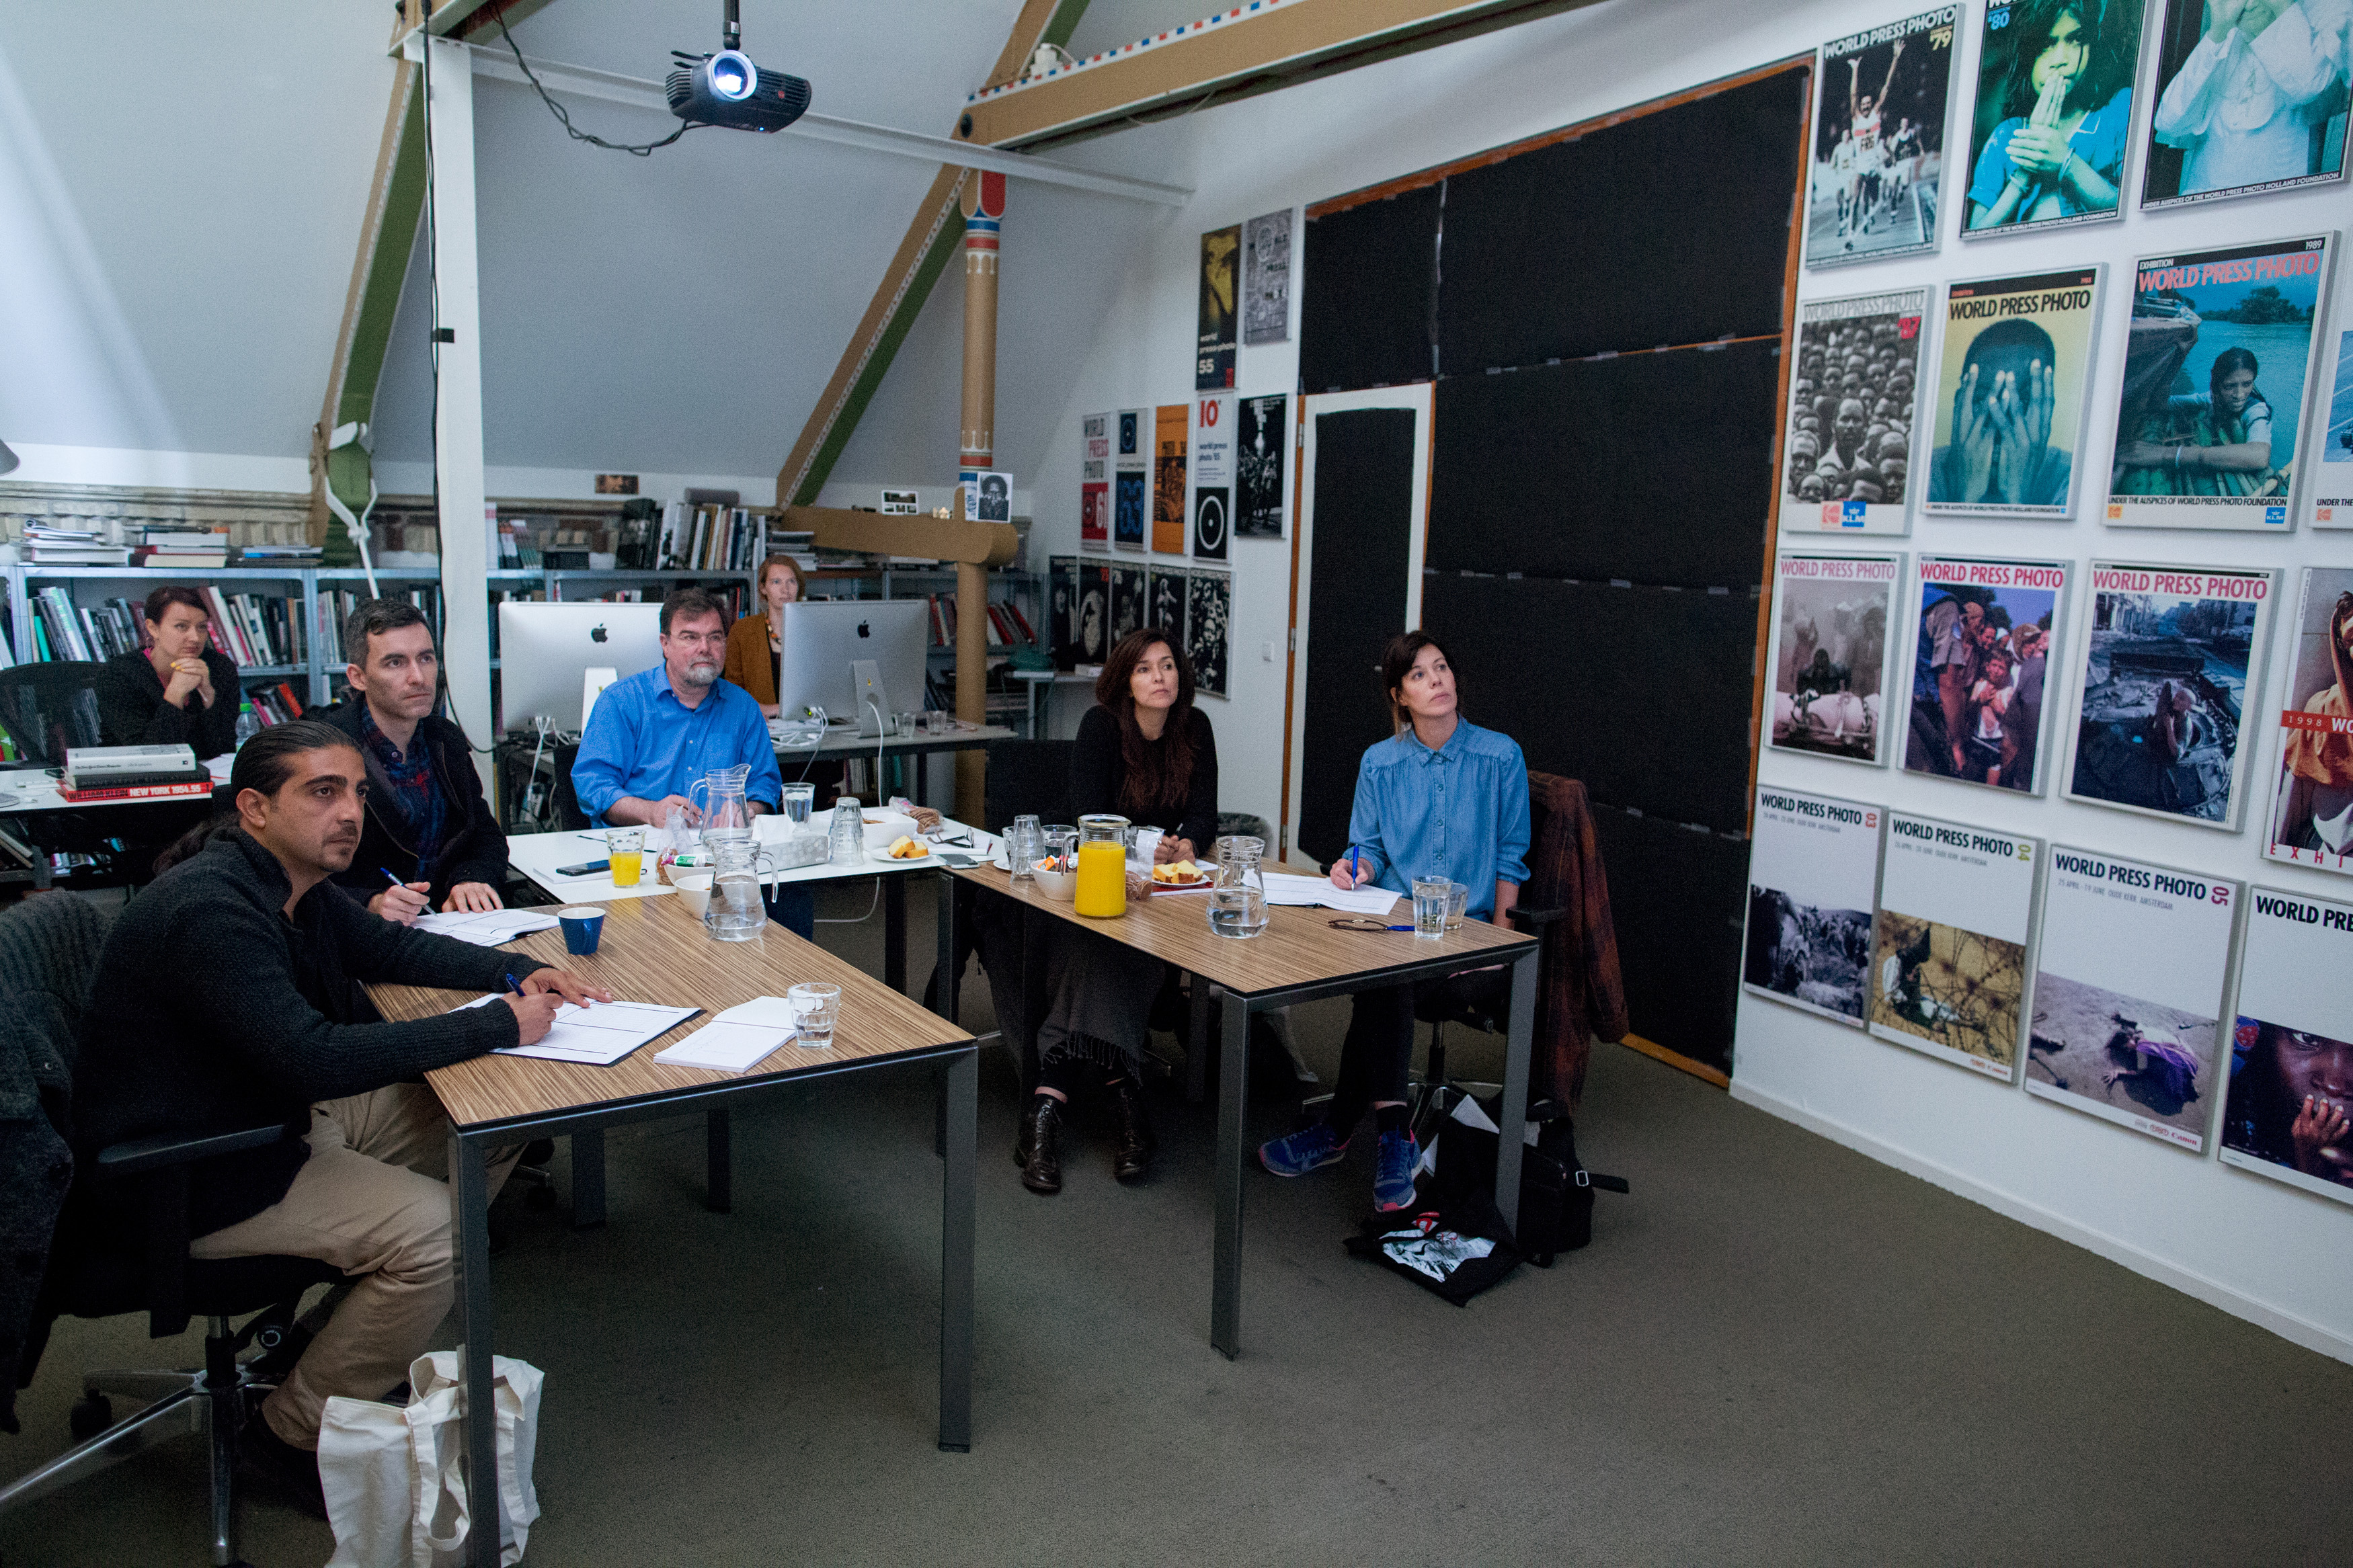 Members of the 2015 Joop Swart Masterclass jury (from left to right: Muhammed Muheisen, Paul Moakley, Jim Casper, Darcy Padilla and Rebecca McClelland) . selects this year's participants. (Bas de Meijer)